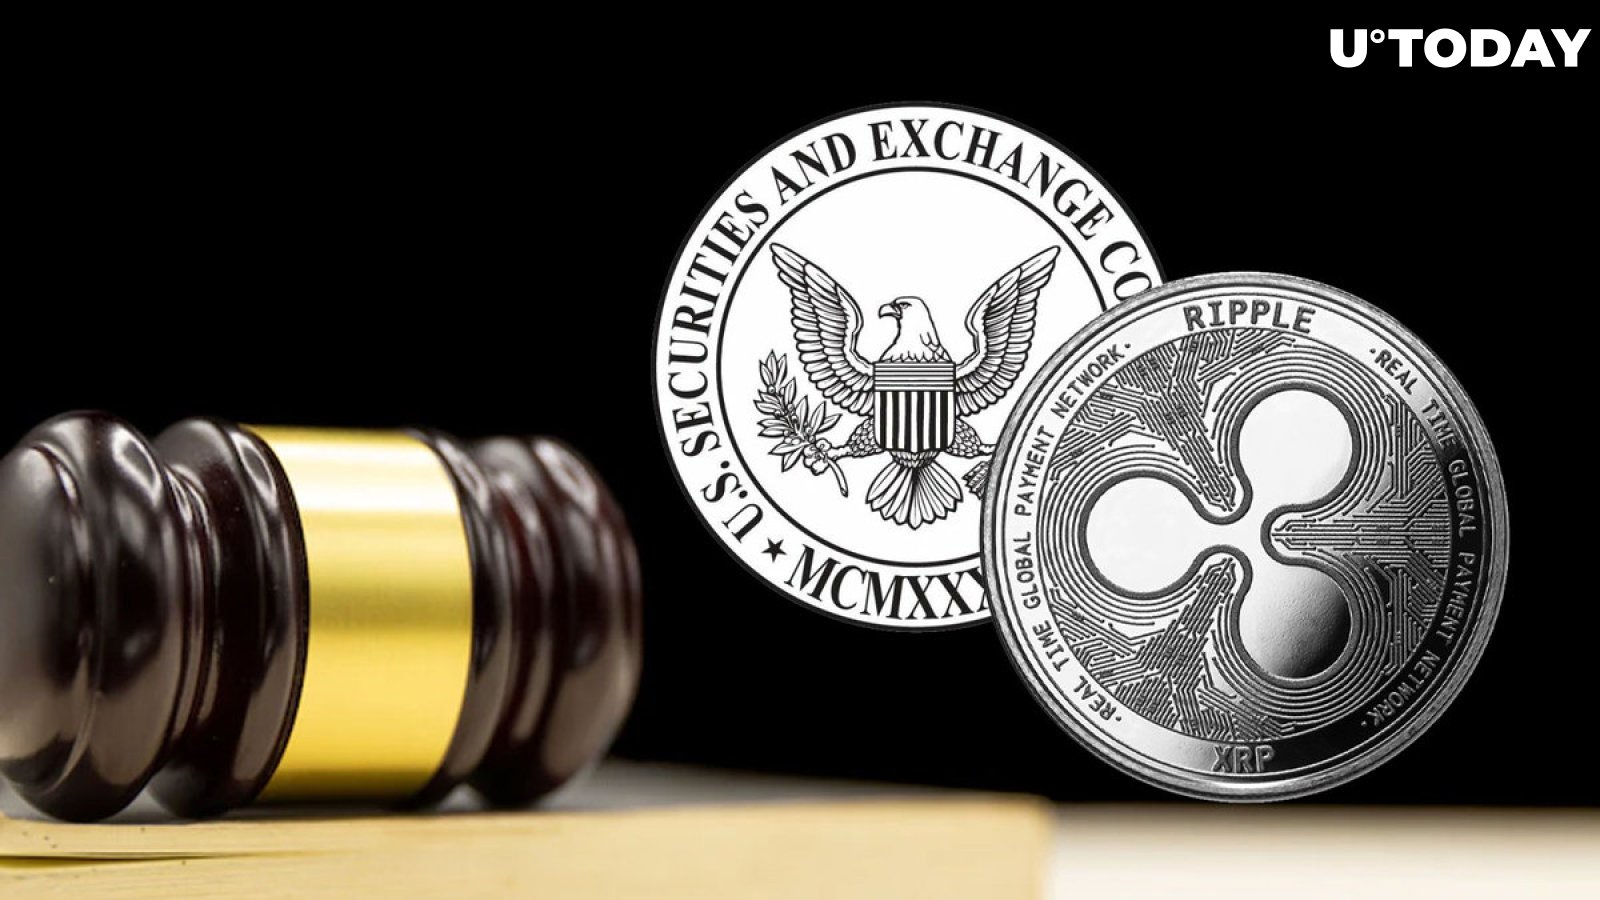 New Twist in Ripple v. SEC Case as Judge Suggests Settlement Conference